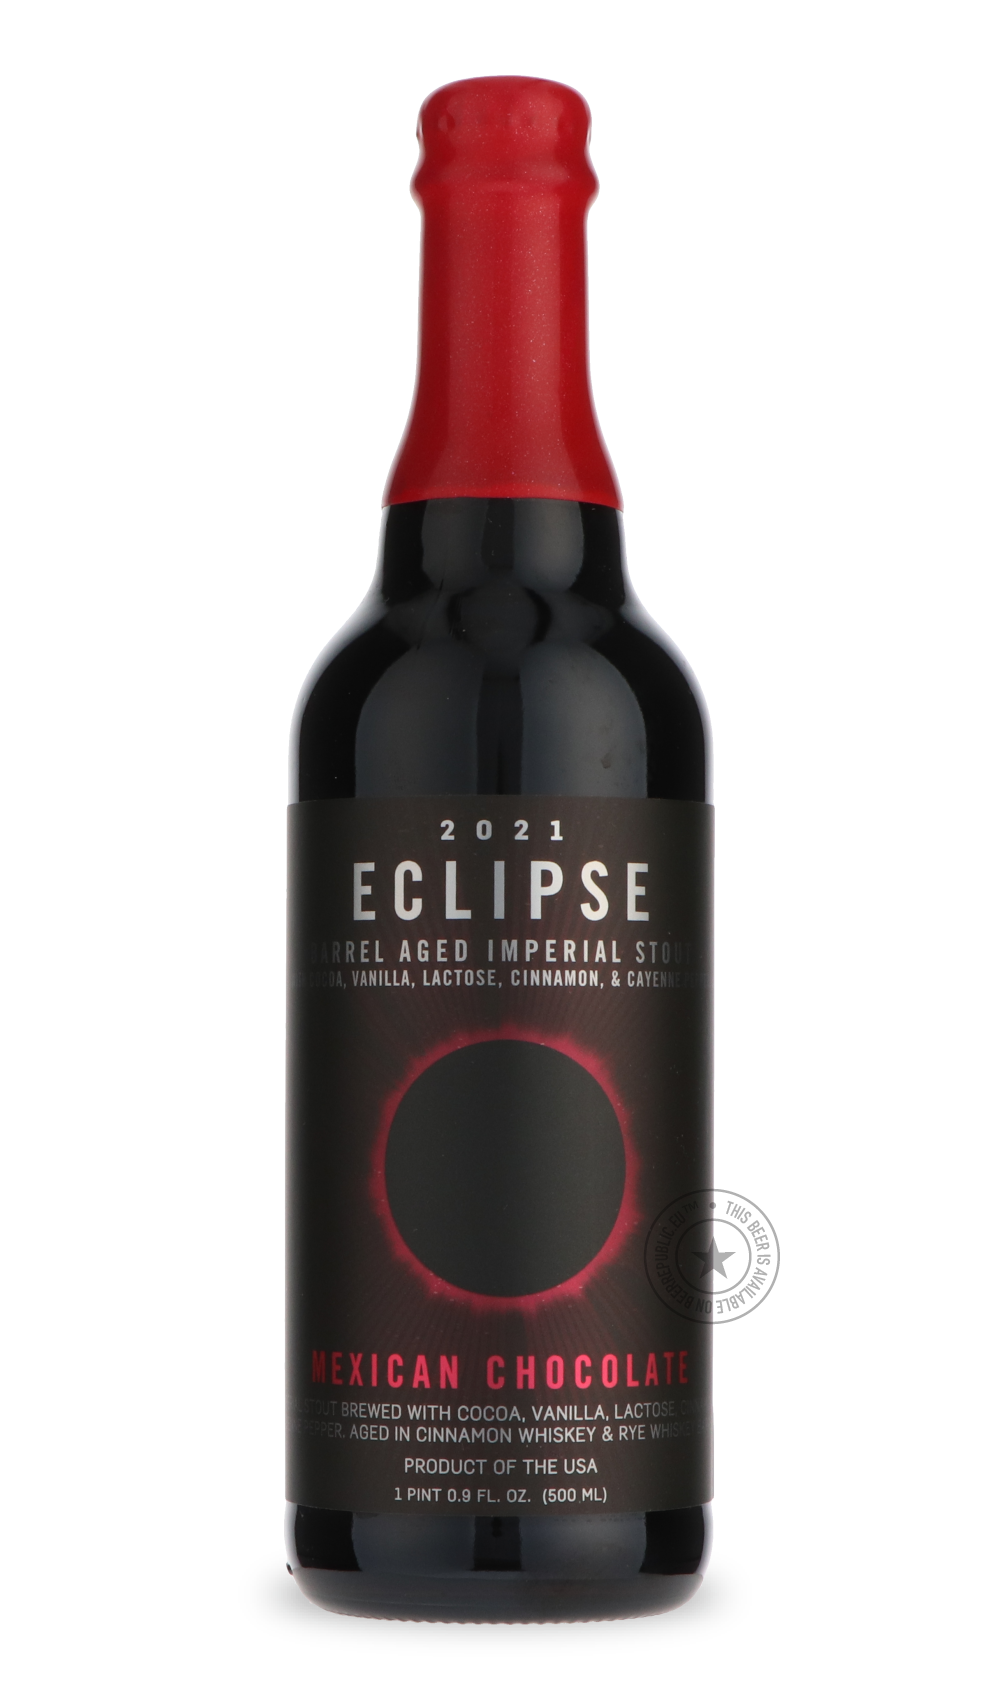 -FiftyFifty- Eclipse Mexican Chocolate-Stout & Porter- Only @ Beer Republic - The best online beer store for American & Canadian craft beer - Buy beer online from the USA and Canada - Bier online kopen - Amerikaans bier kopen - Craft beer store - Craft beer kopen - Amerikanisch bier kaufen - Bier online kaufen - Acheter biere online - IPA - Stout - Porter - New England IPA - Hazy IPA - Imperial Stout - Barrel Aged - Barrel Aged Imperial Stout - Brown - Dark beer - Blond - Blonde - Pilsner - Lager - Wheat - 